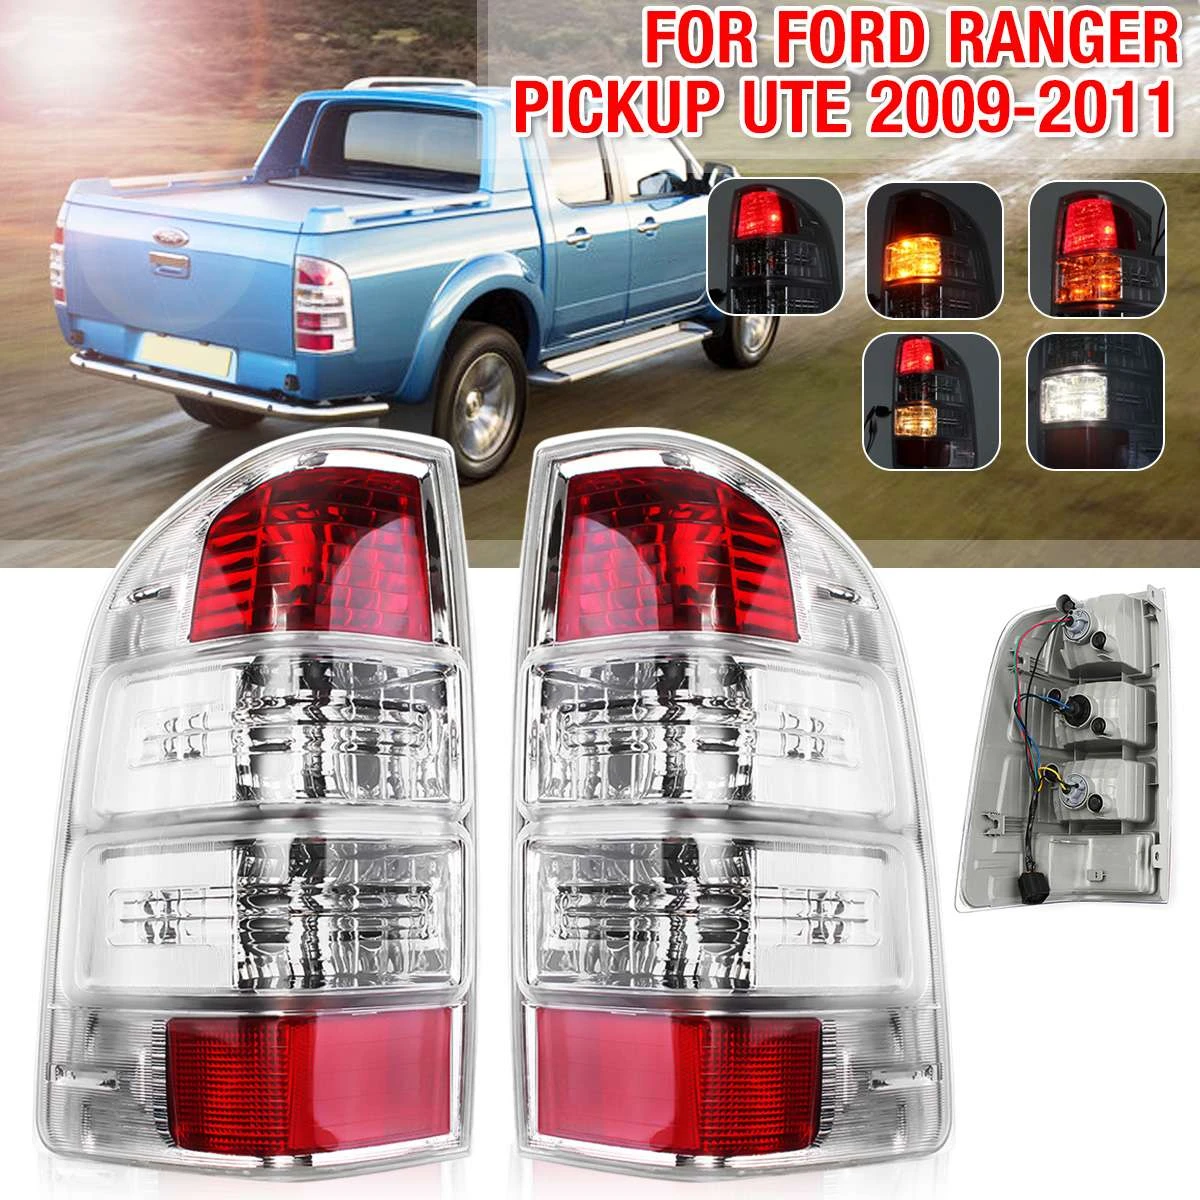 US $35.12 LeftRight Car Rear Tail Light Assembly Brake Lamp With Bulb Wiring Harness For Ford Ranger Pickup Ute 2008 2009 2010 2011